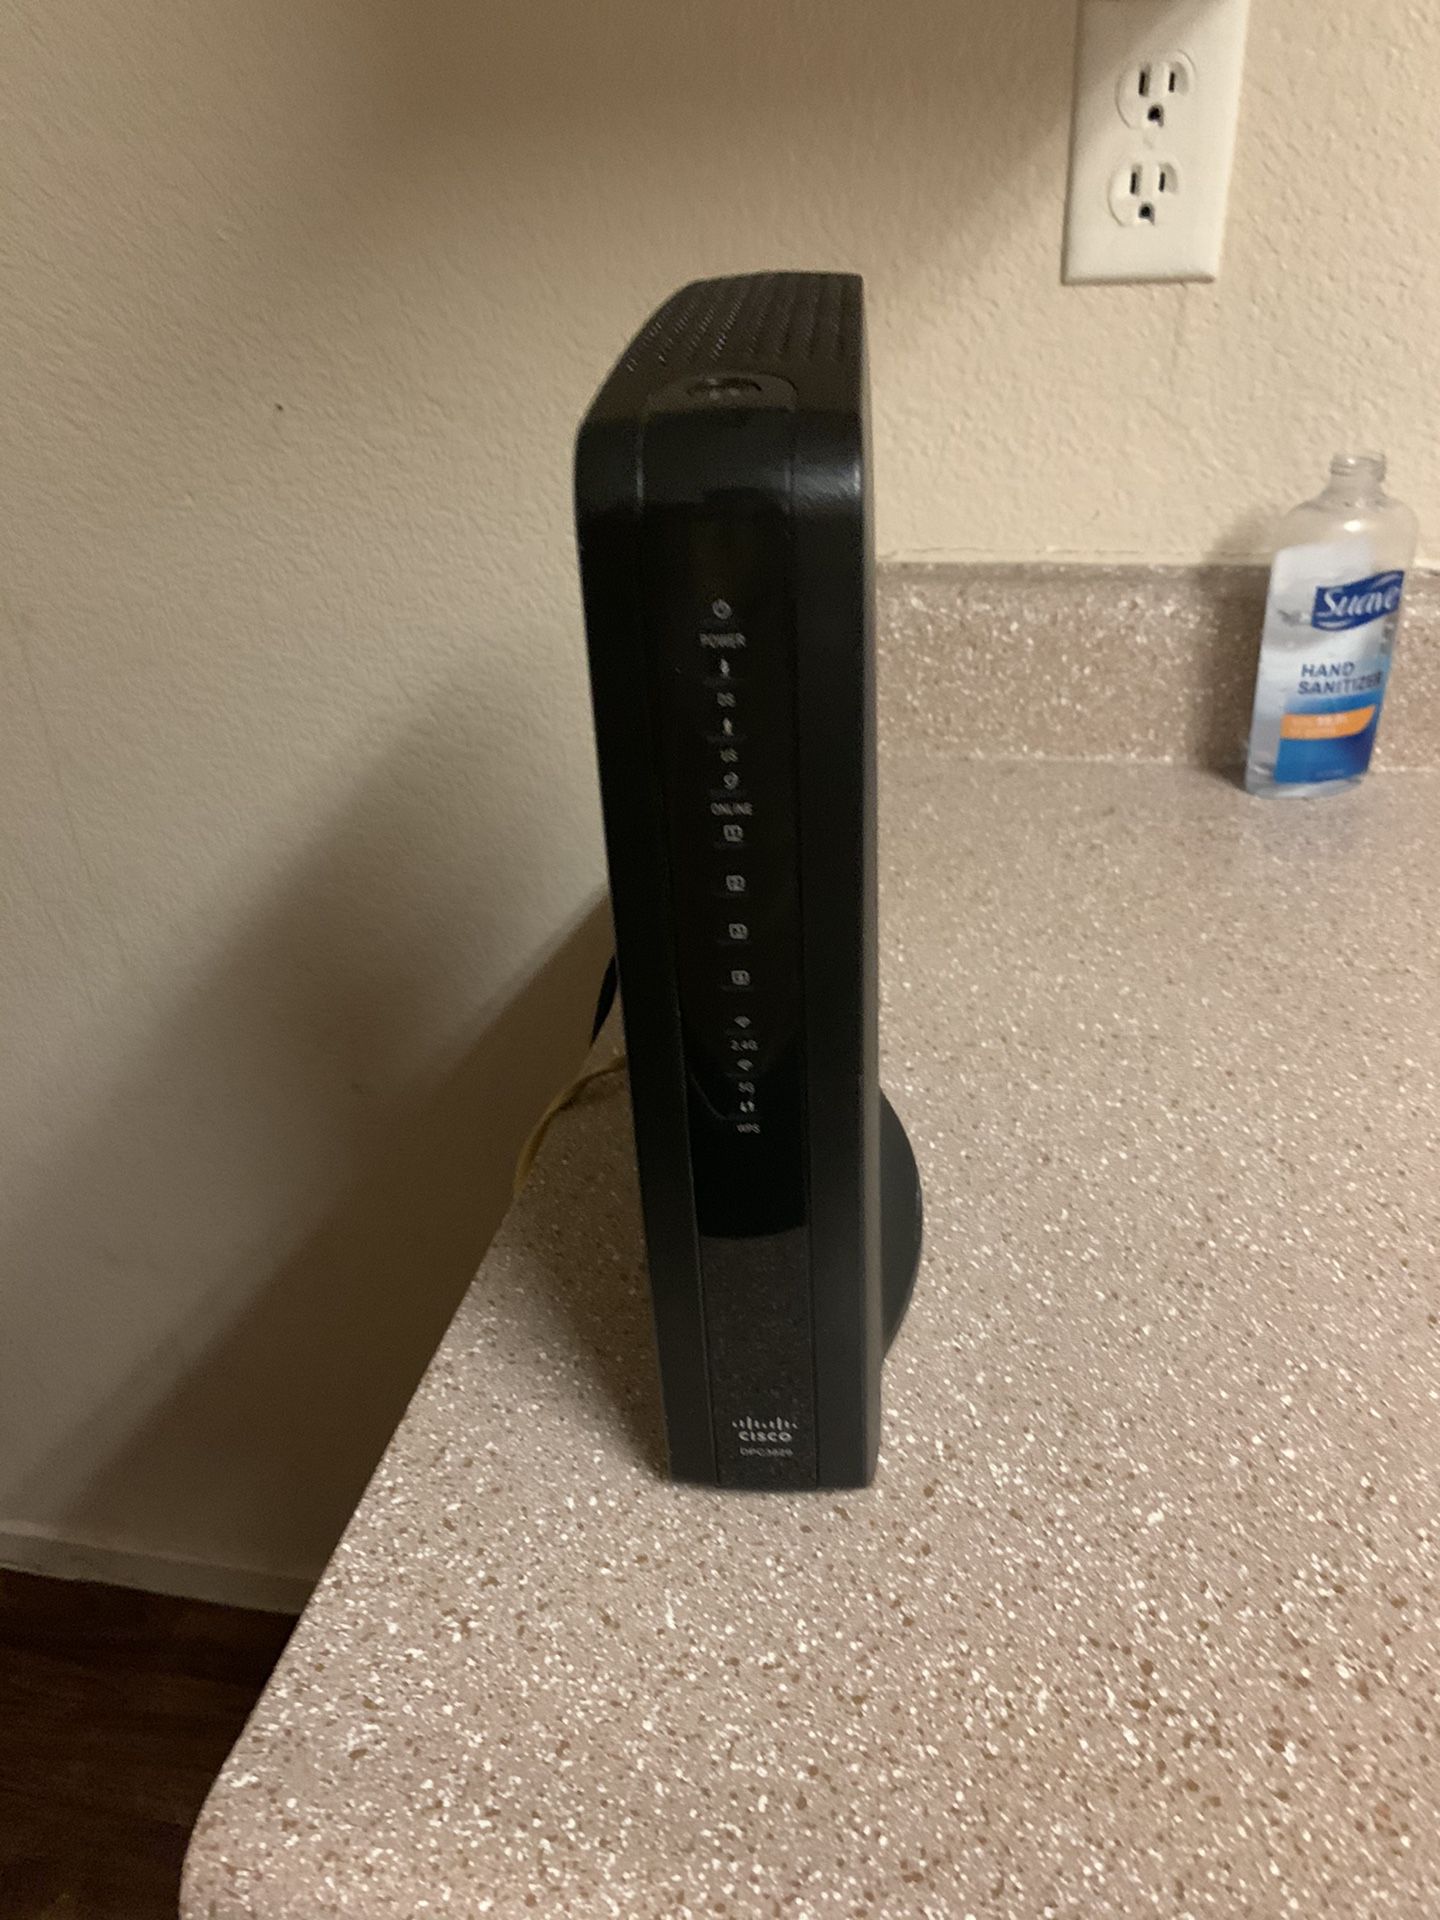 Cisco Residential Gateway Cable Modem & Router